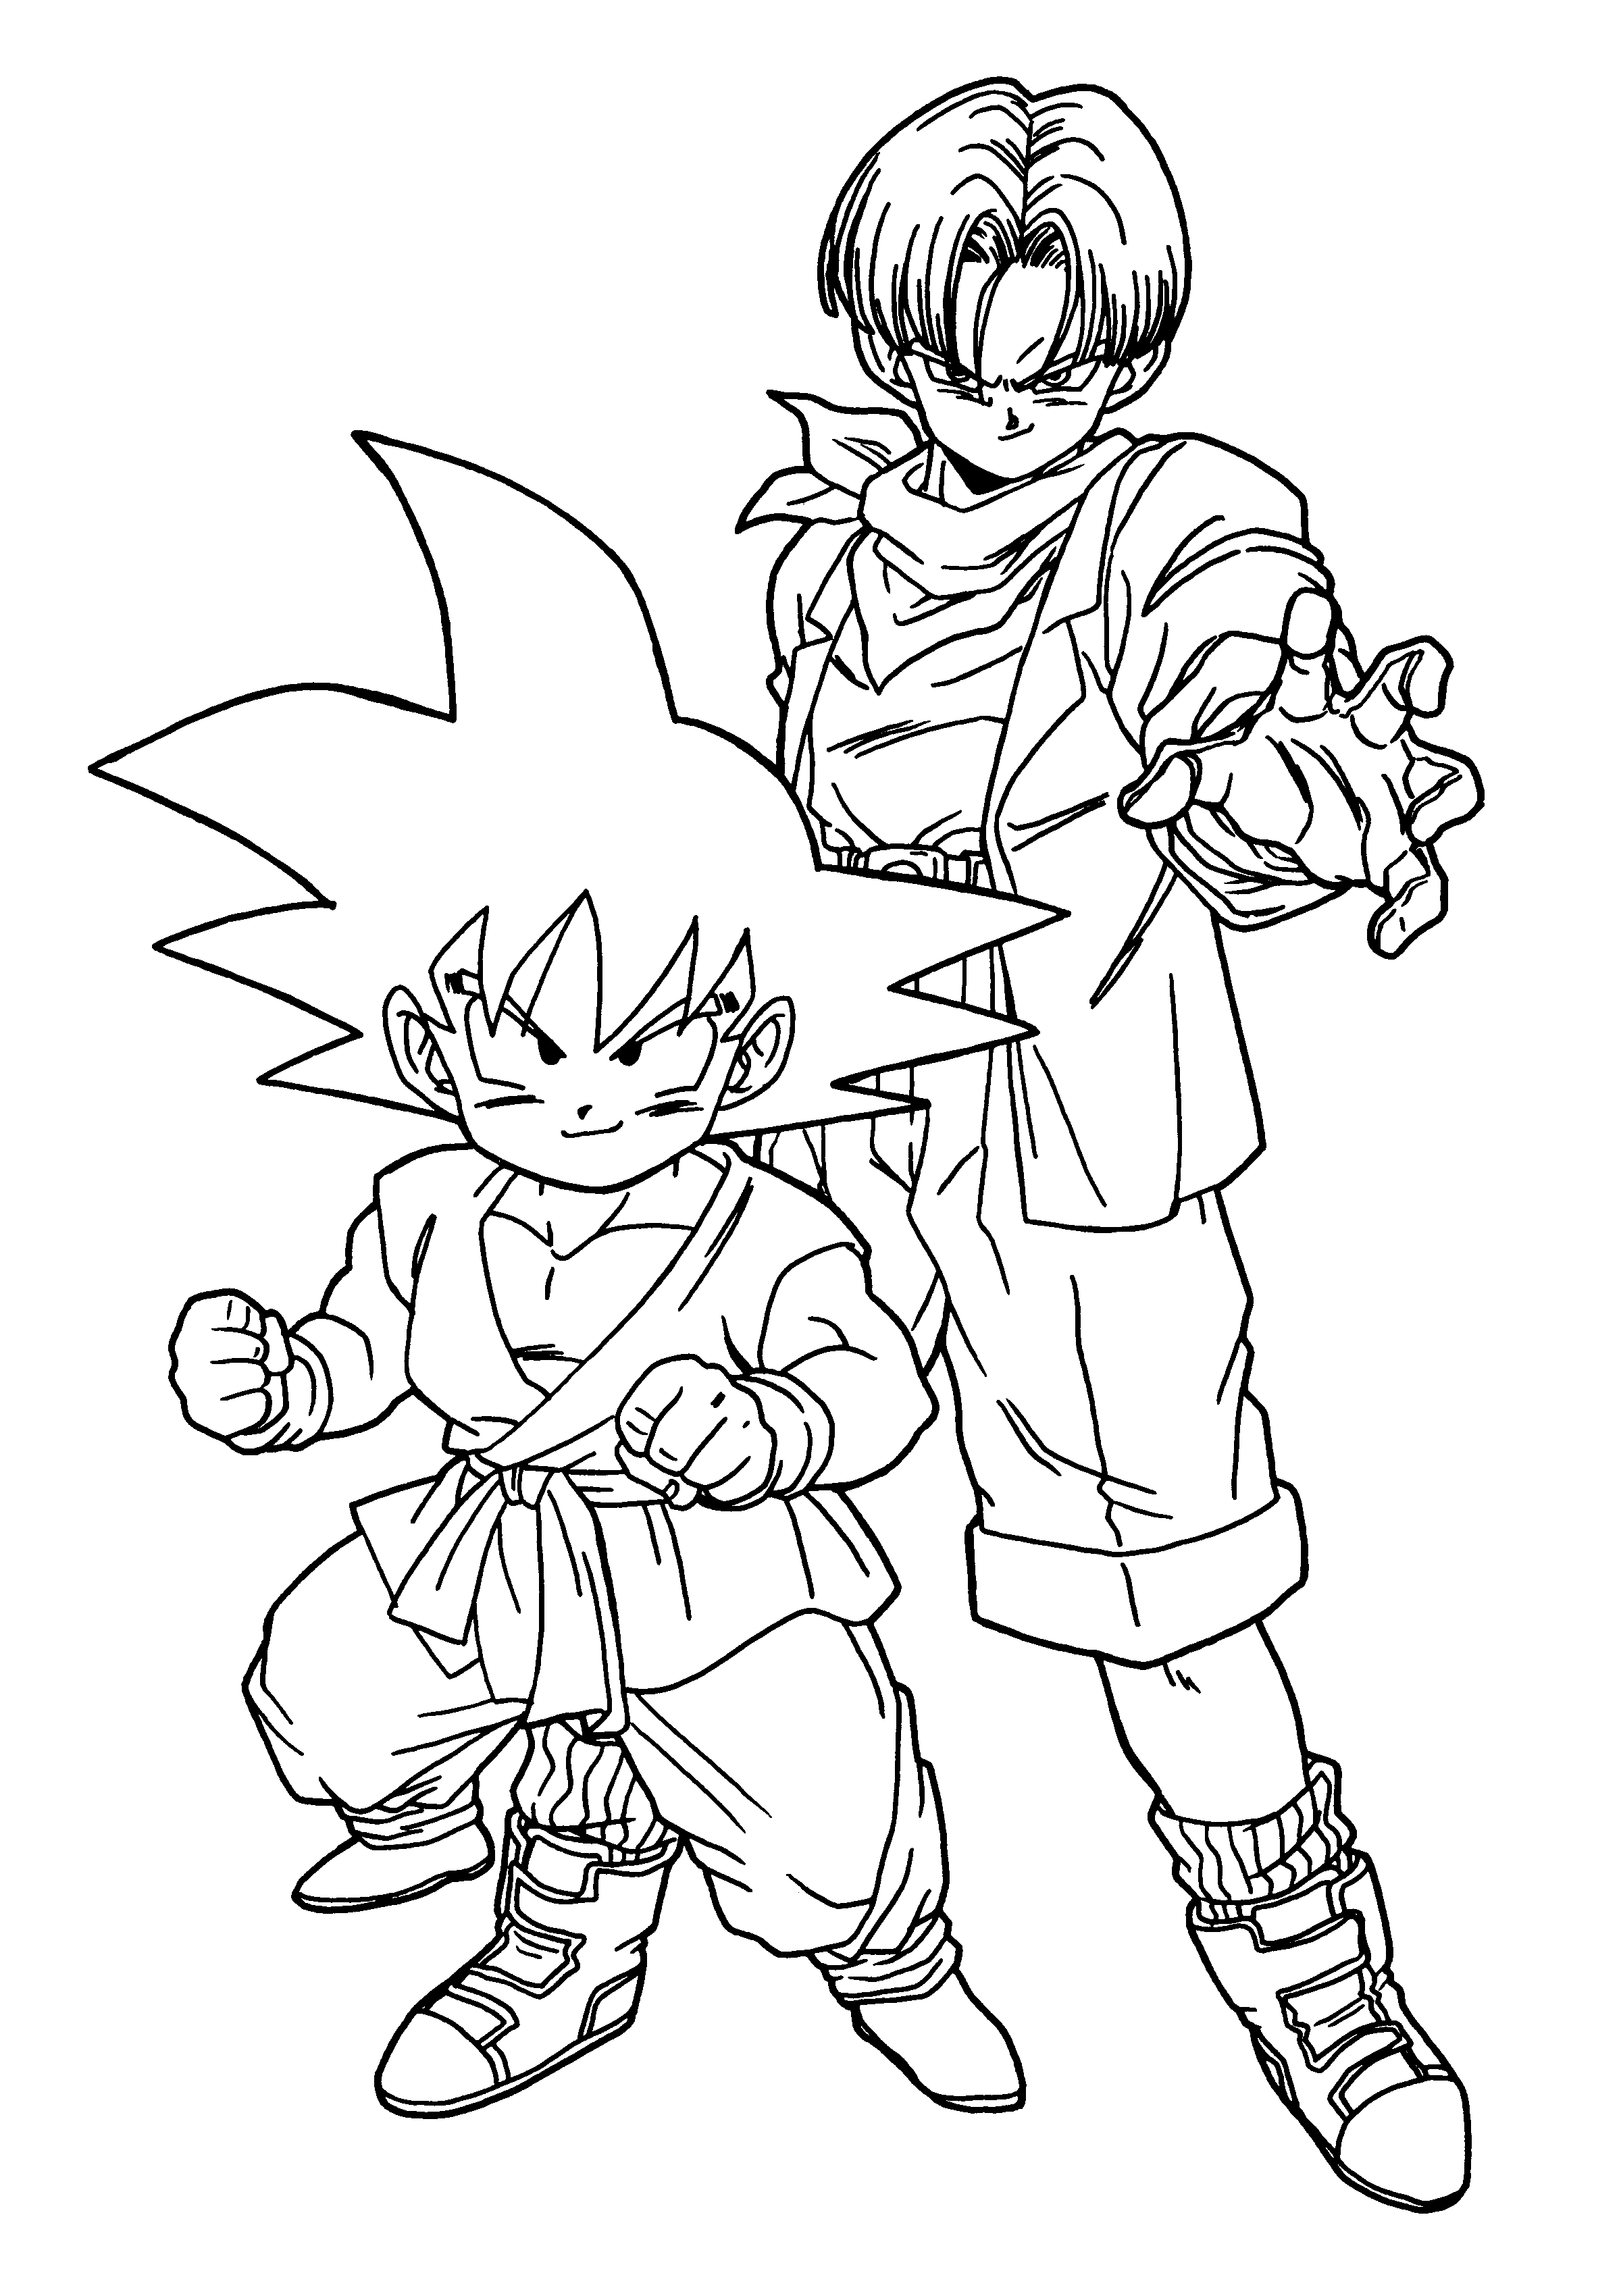 color dragon ball z dragon ball coloring pages best coloring pages for kids dragon color z ball 